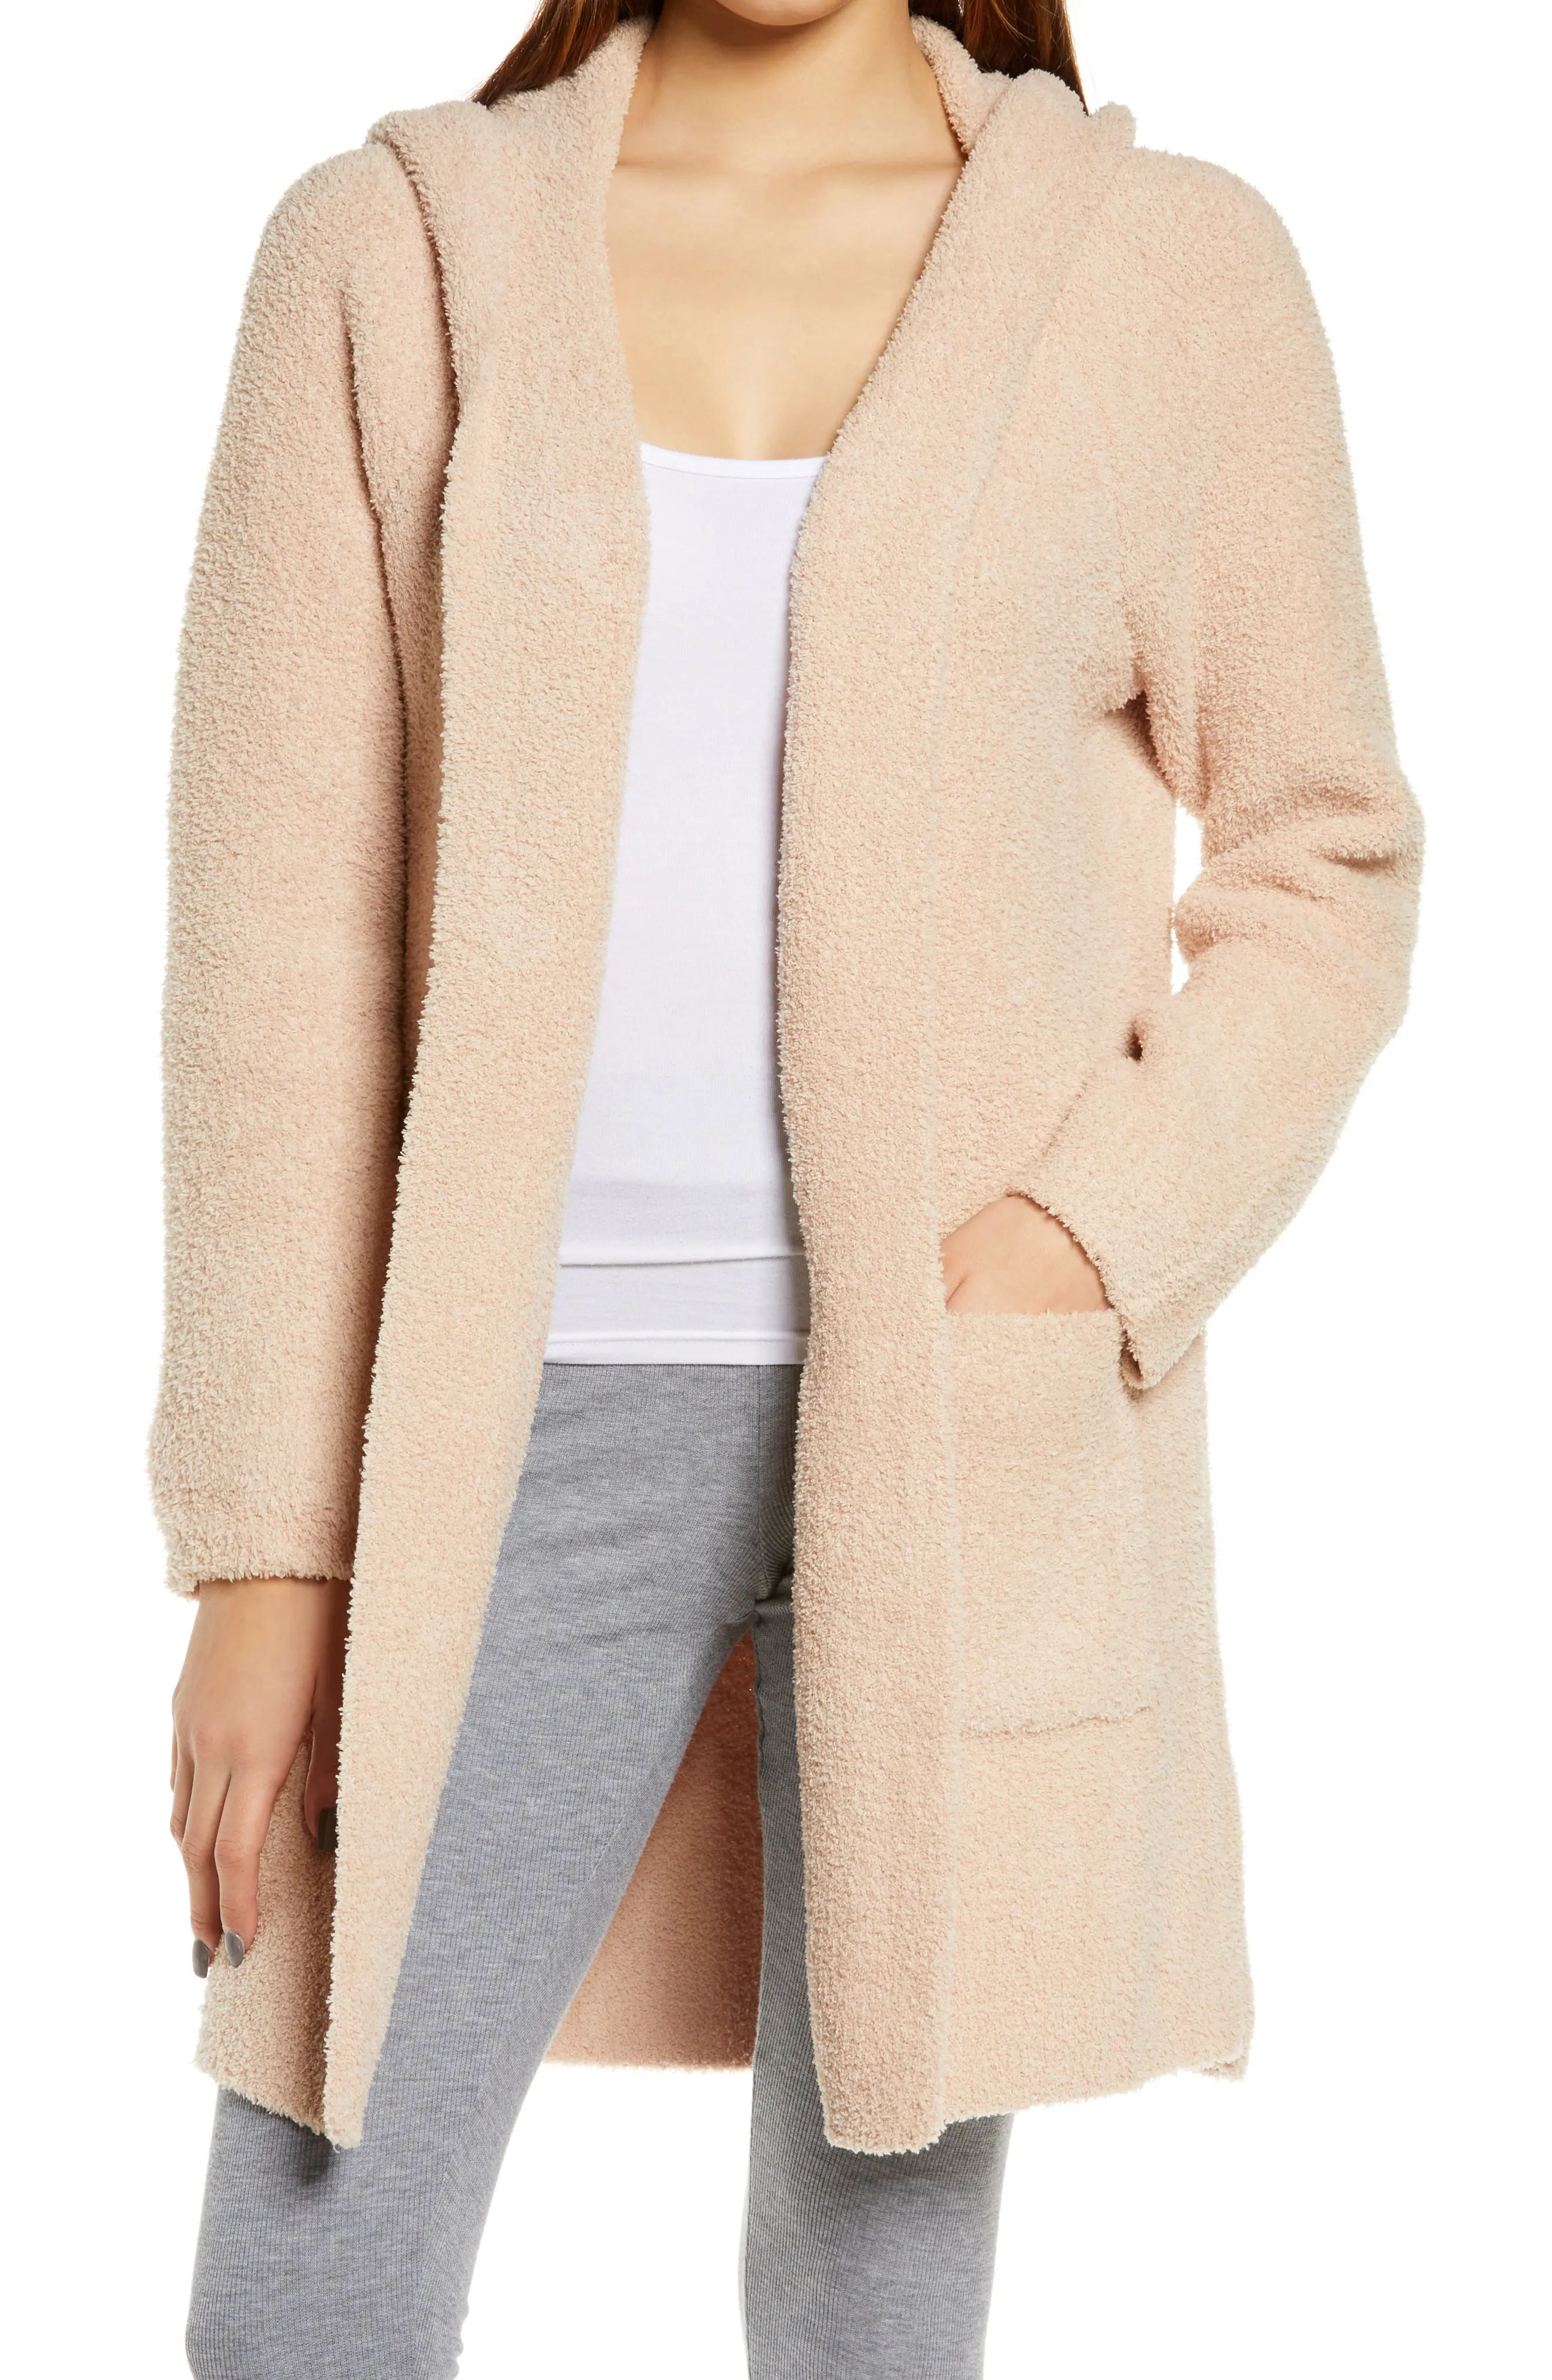 Barefoot Dreams(R) CozyChic(TM) Long Hooded Cardigan, Size Medium in Soft Camel at Nordstrom | Nordstrom